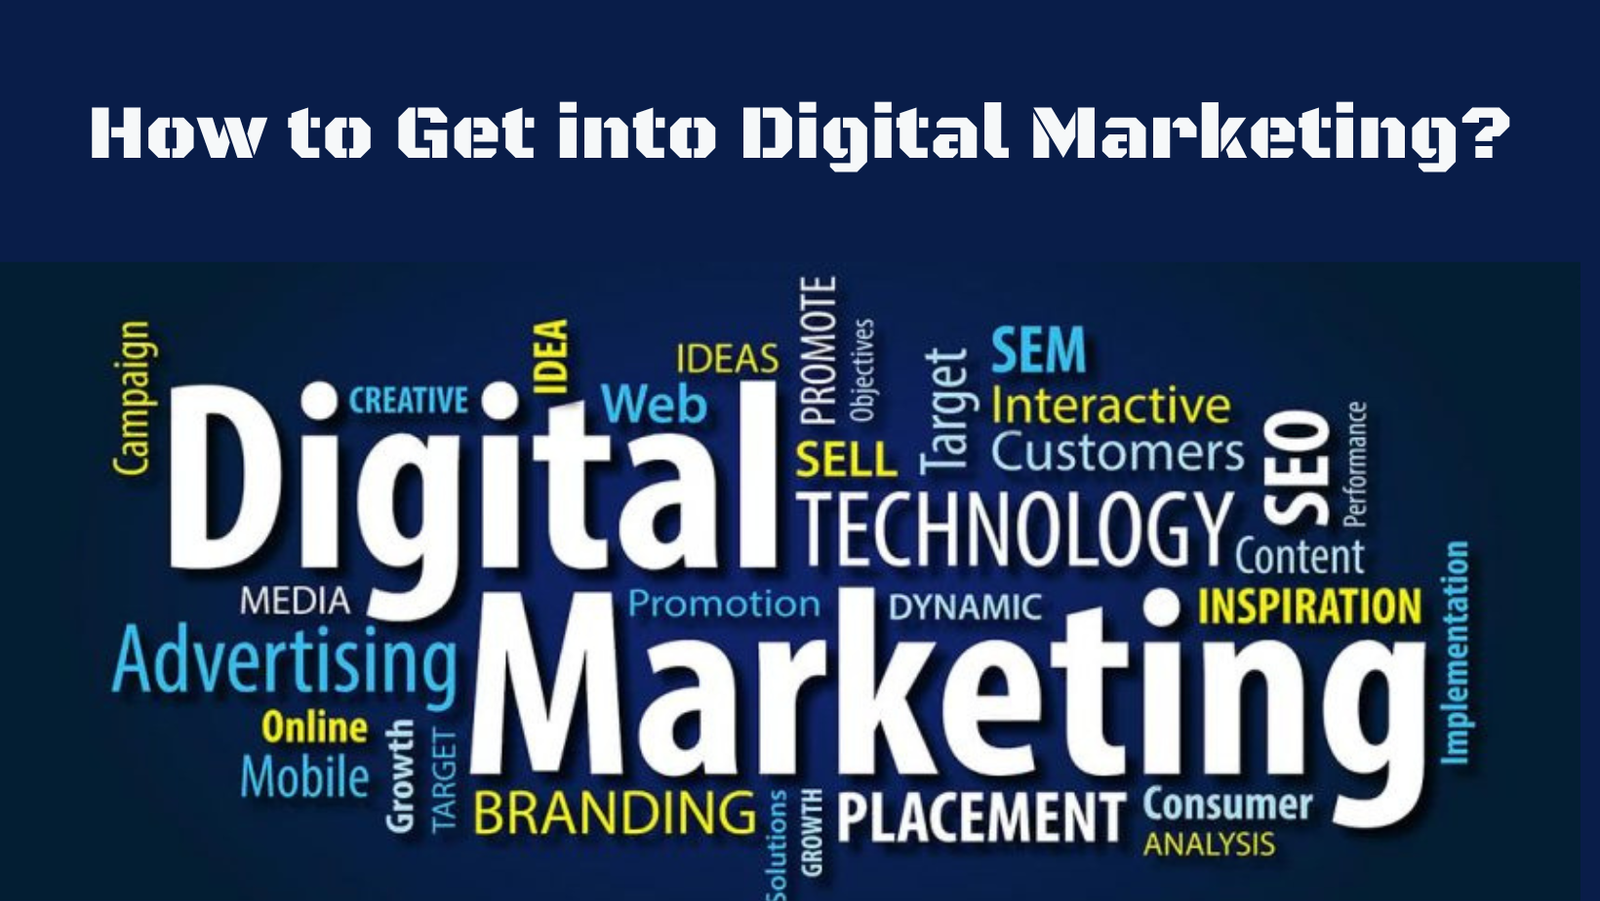 Featured image of an article on How to Get into Digital Marketing